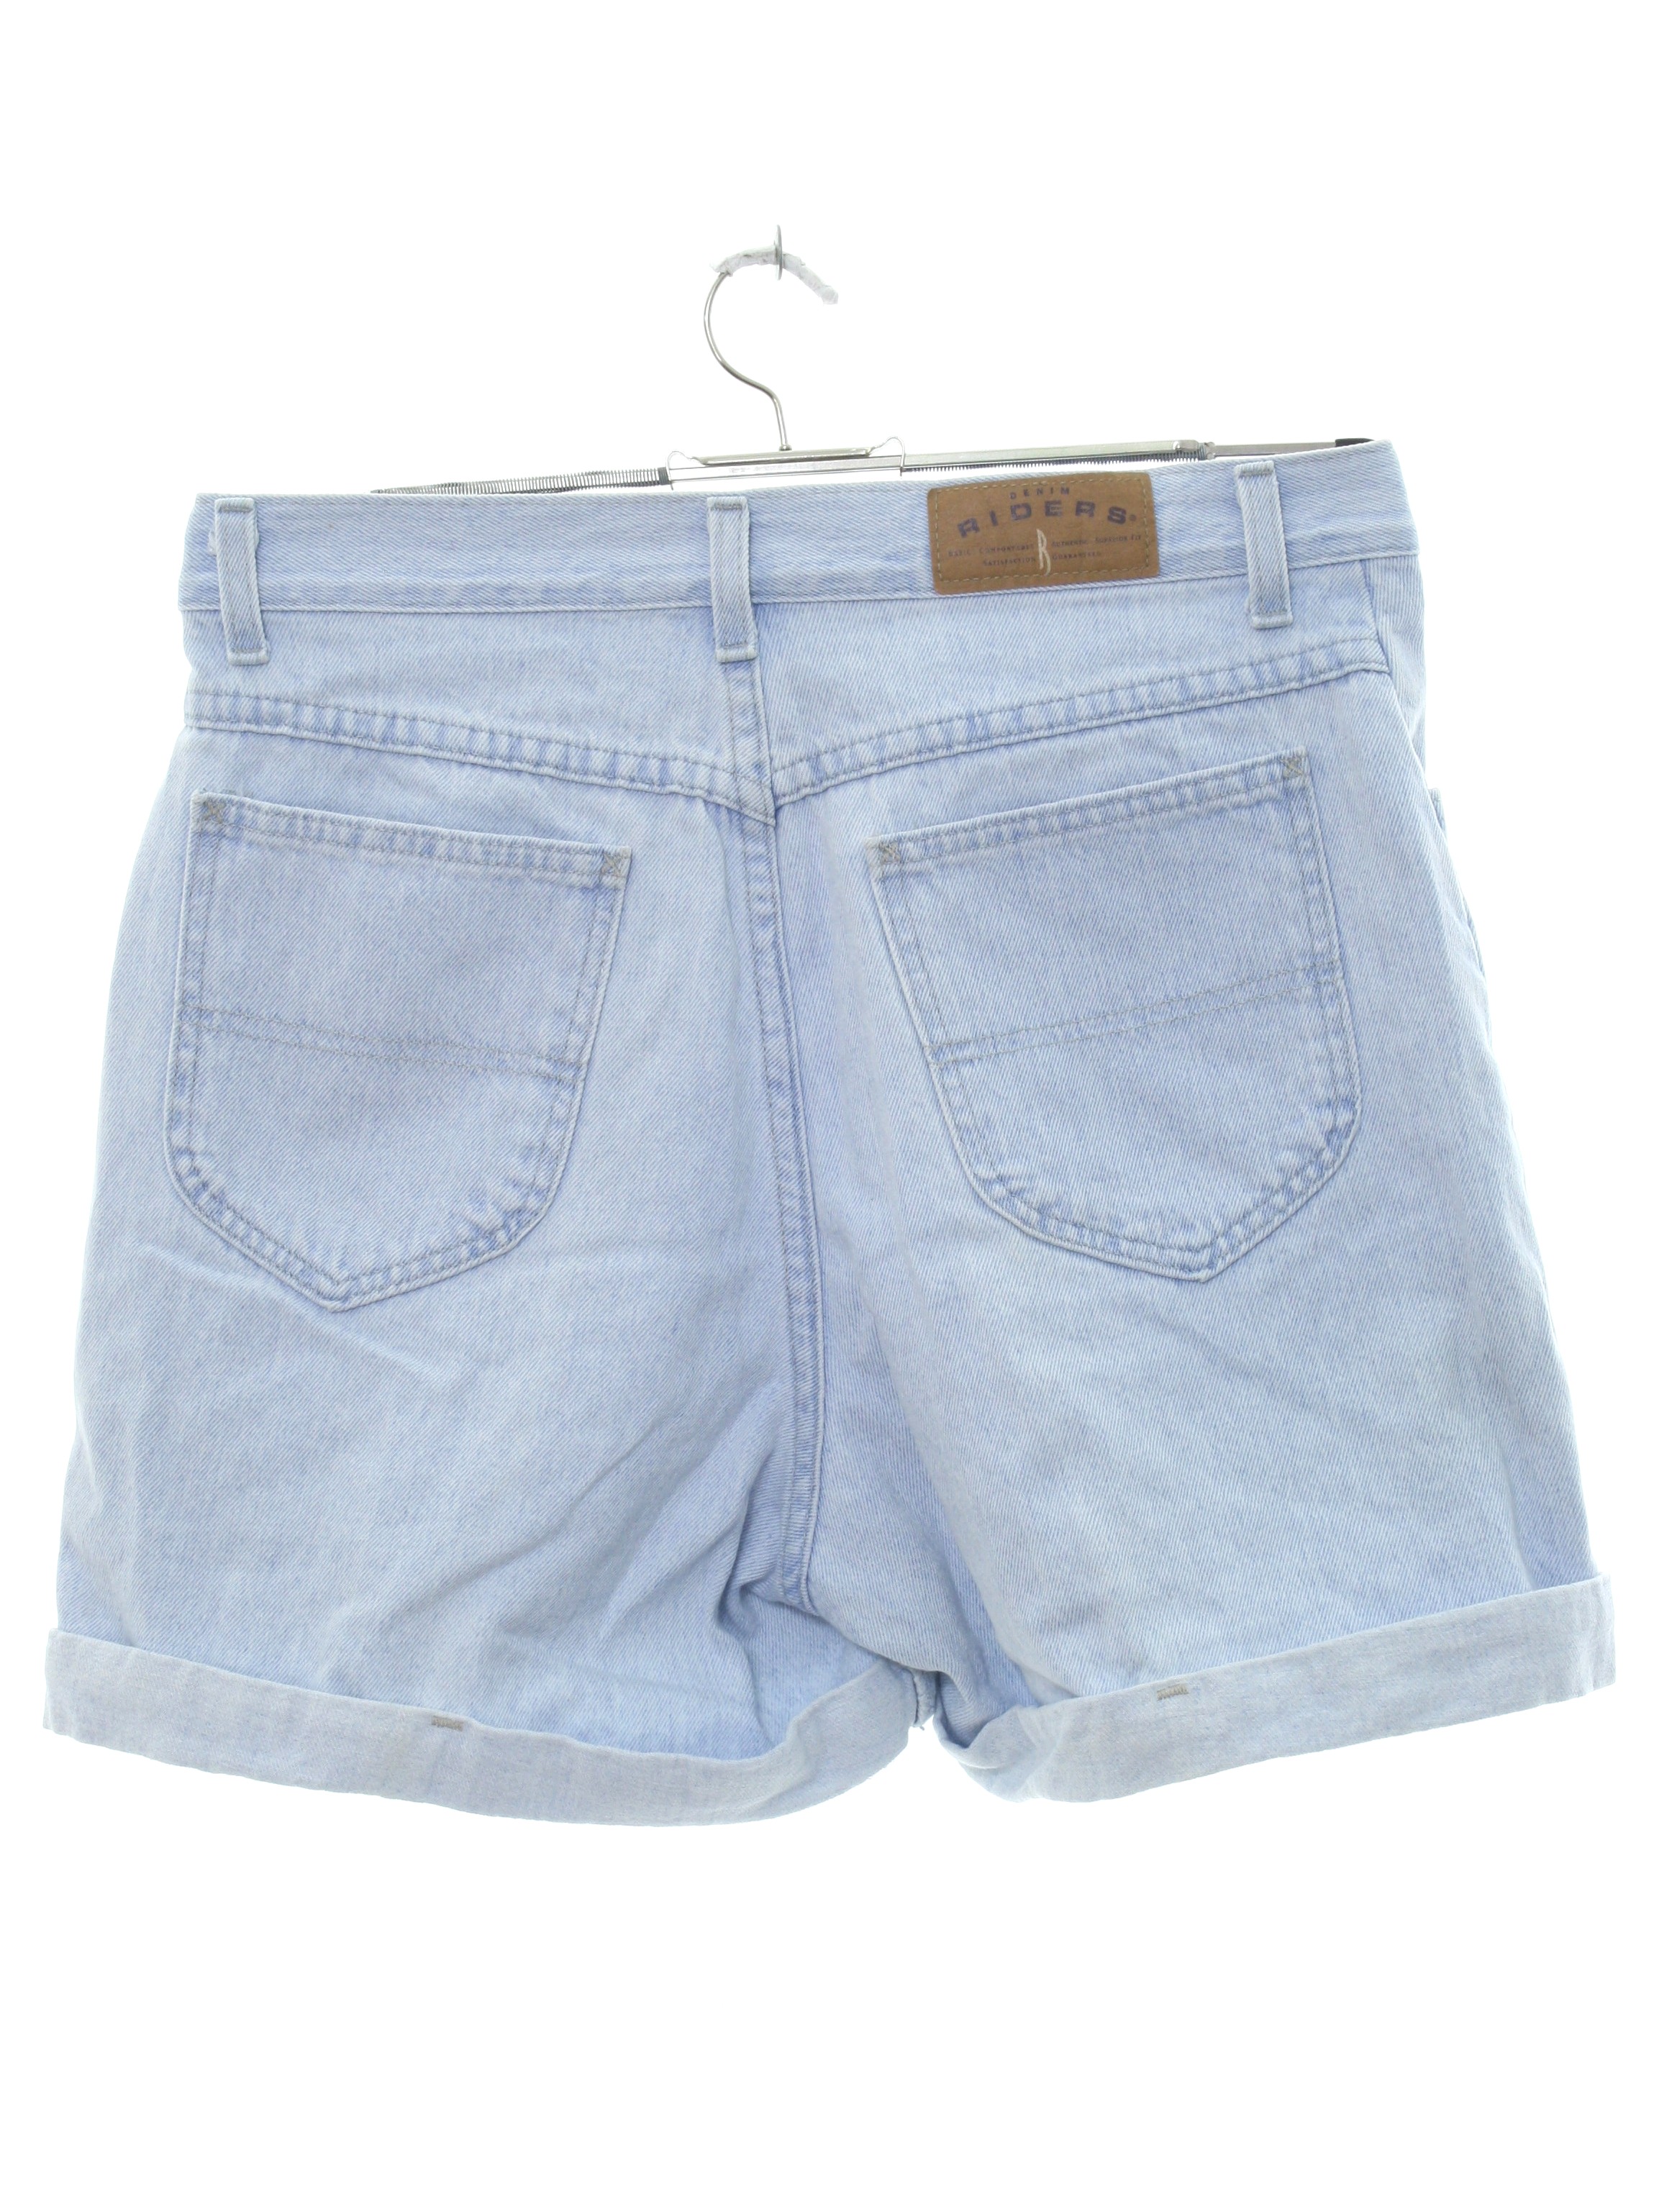 1990's Shorts (Riders): 90s -Riders- Womens light wash blue cotton ...